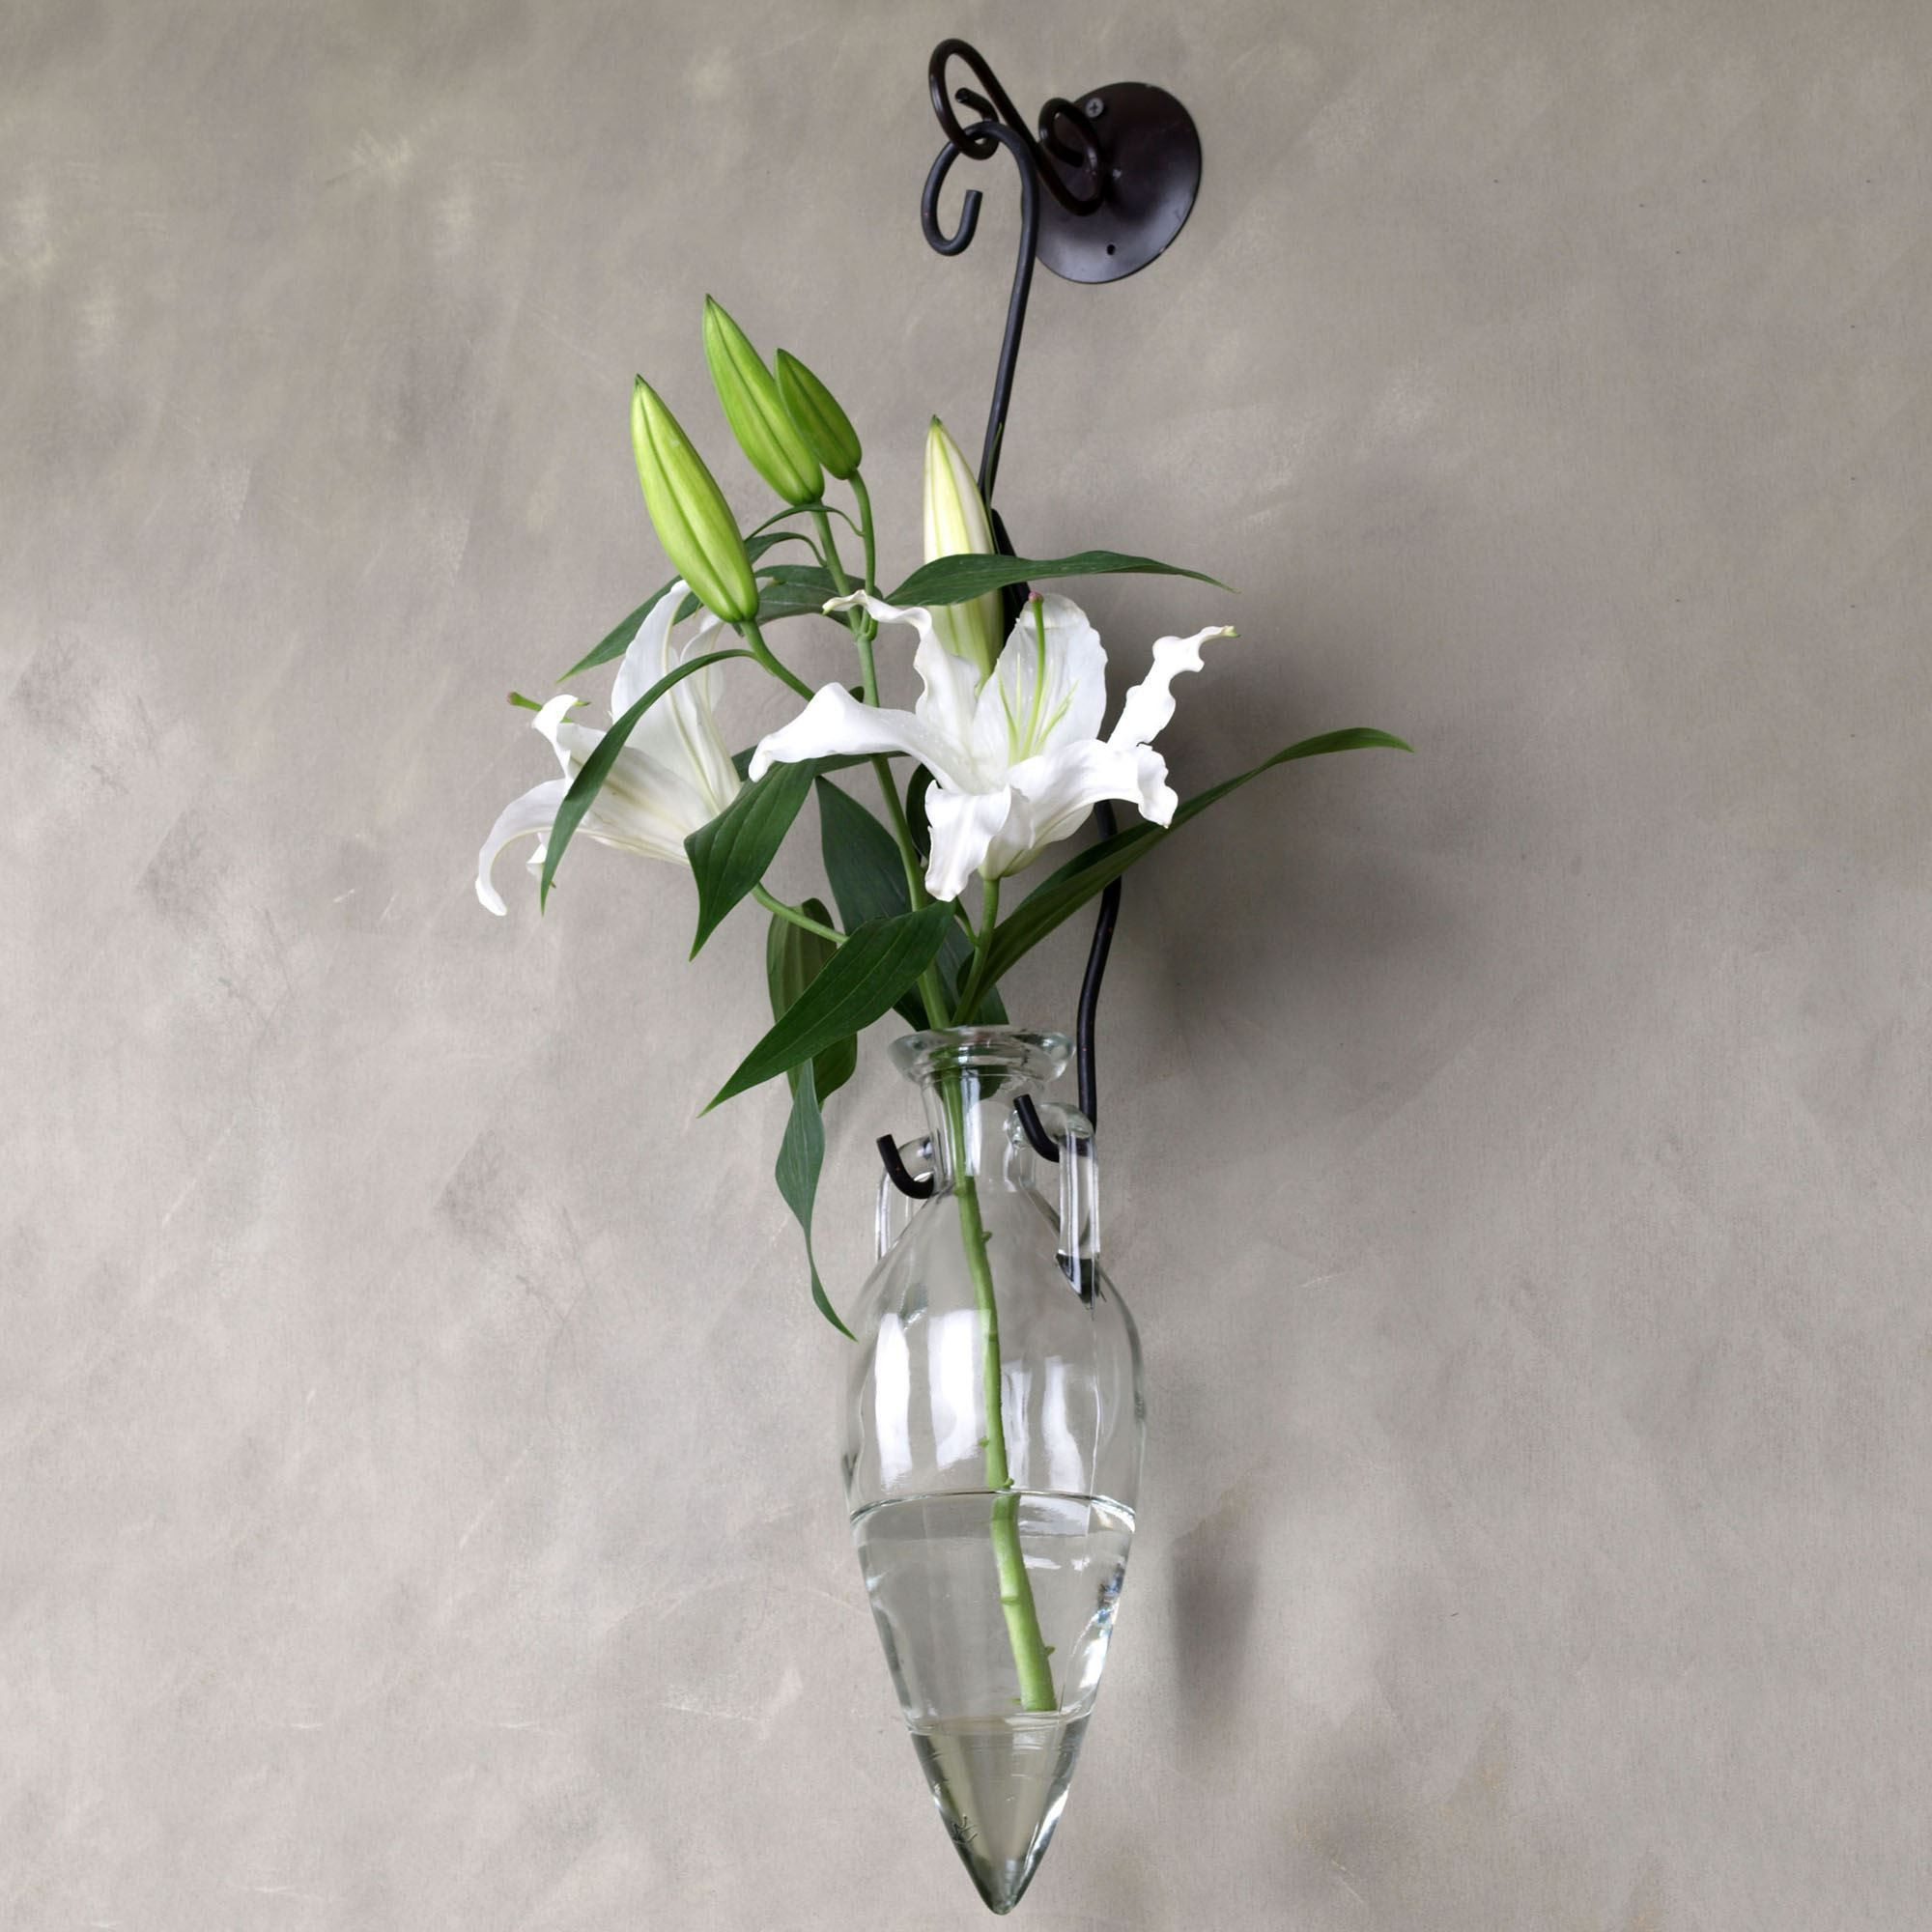 13 attractive White Floor Vase with Flowers 2022 free download white floor vase with flowers of 30 copper flower vase the weekly world pertaining to 33 inspirational silver vase decor h vases wall hanging flower